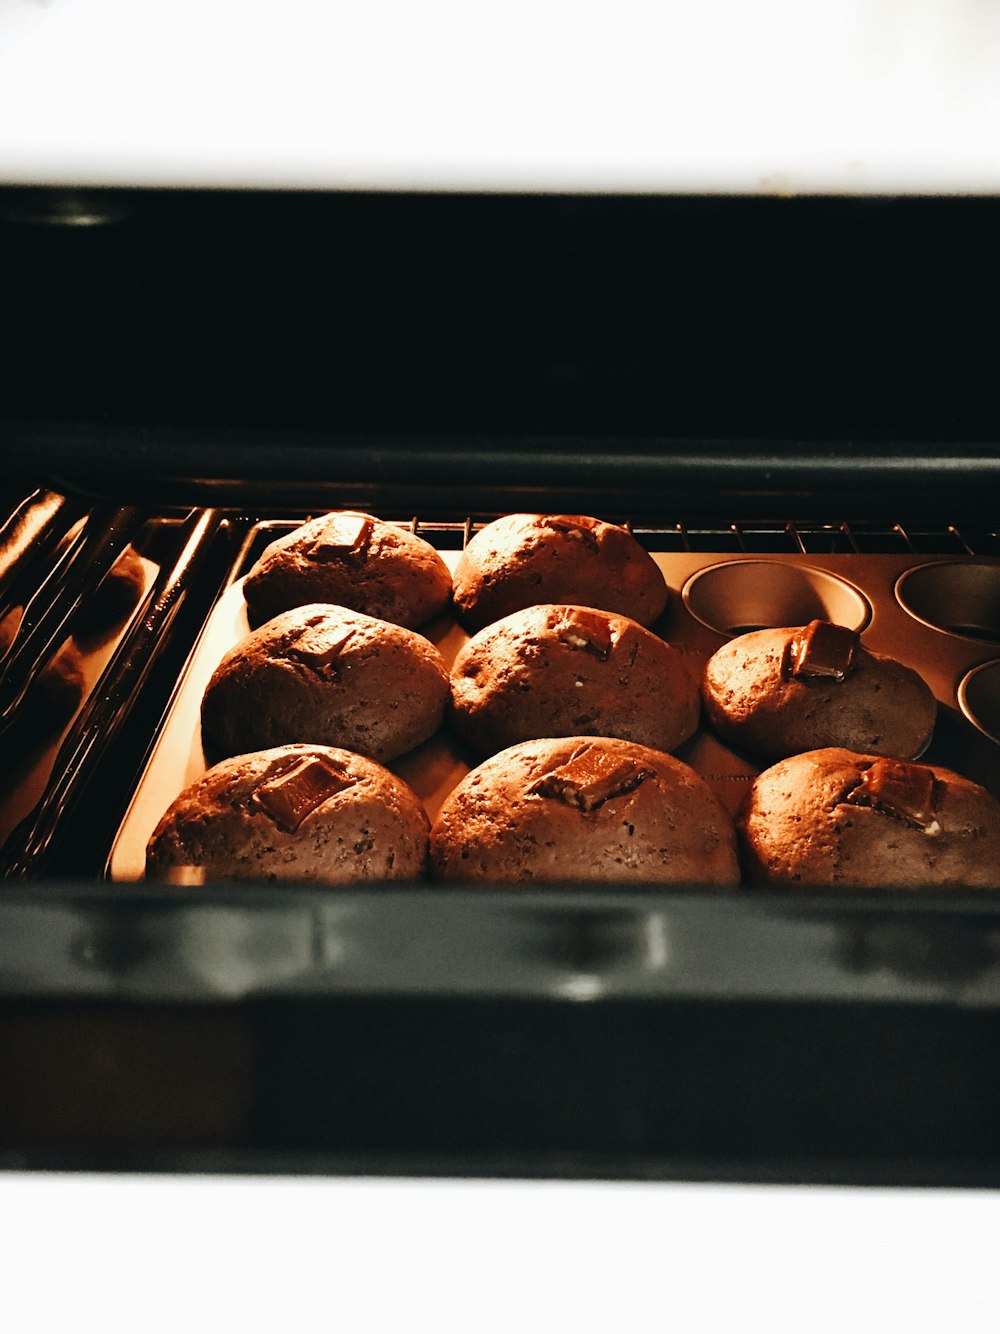 a close up of muffins baking in an oven